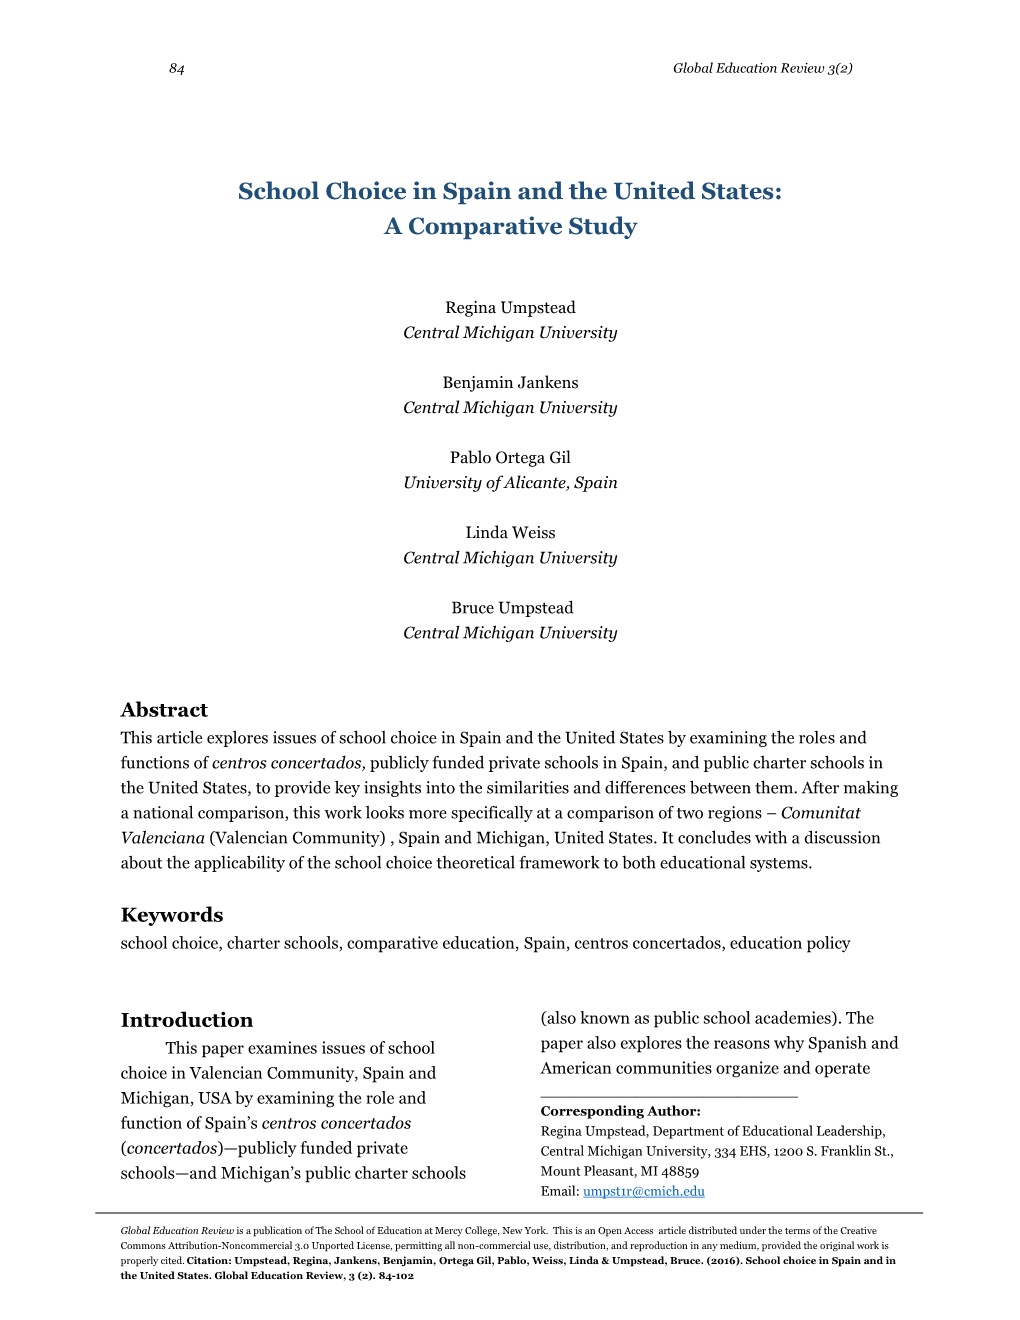 School Choice in Spain and the United States: a Comparative Study